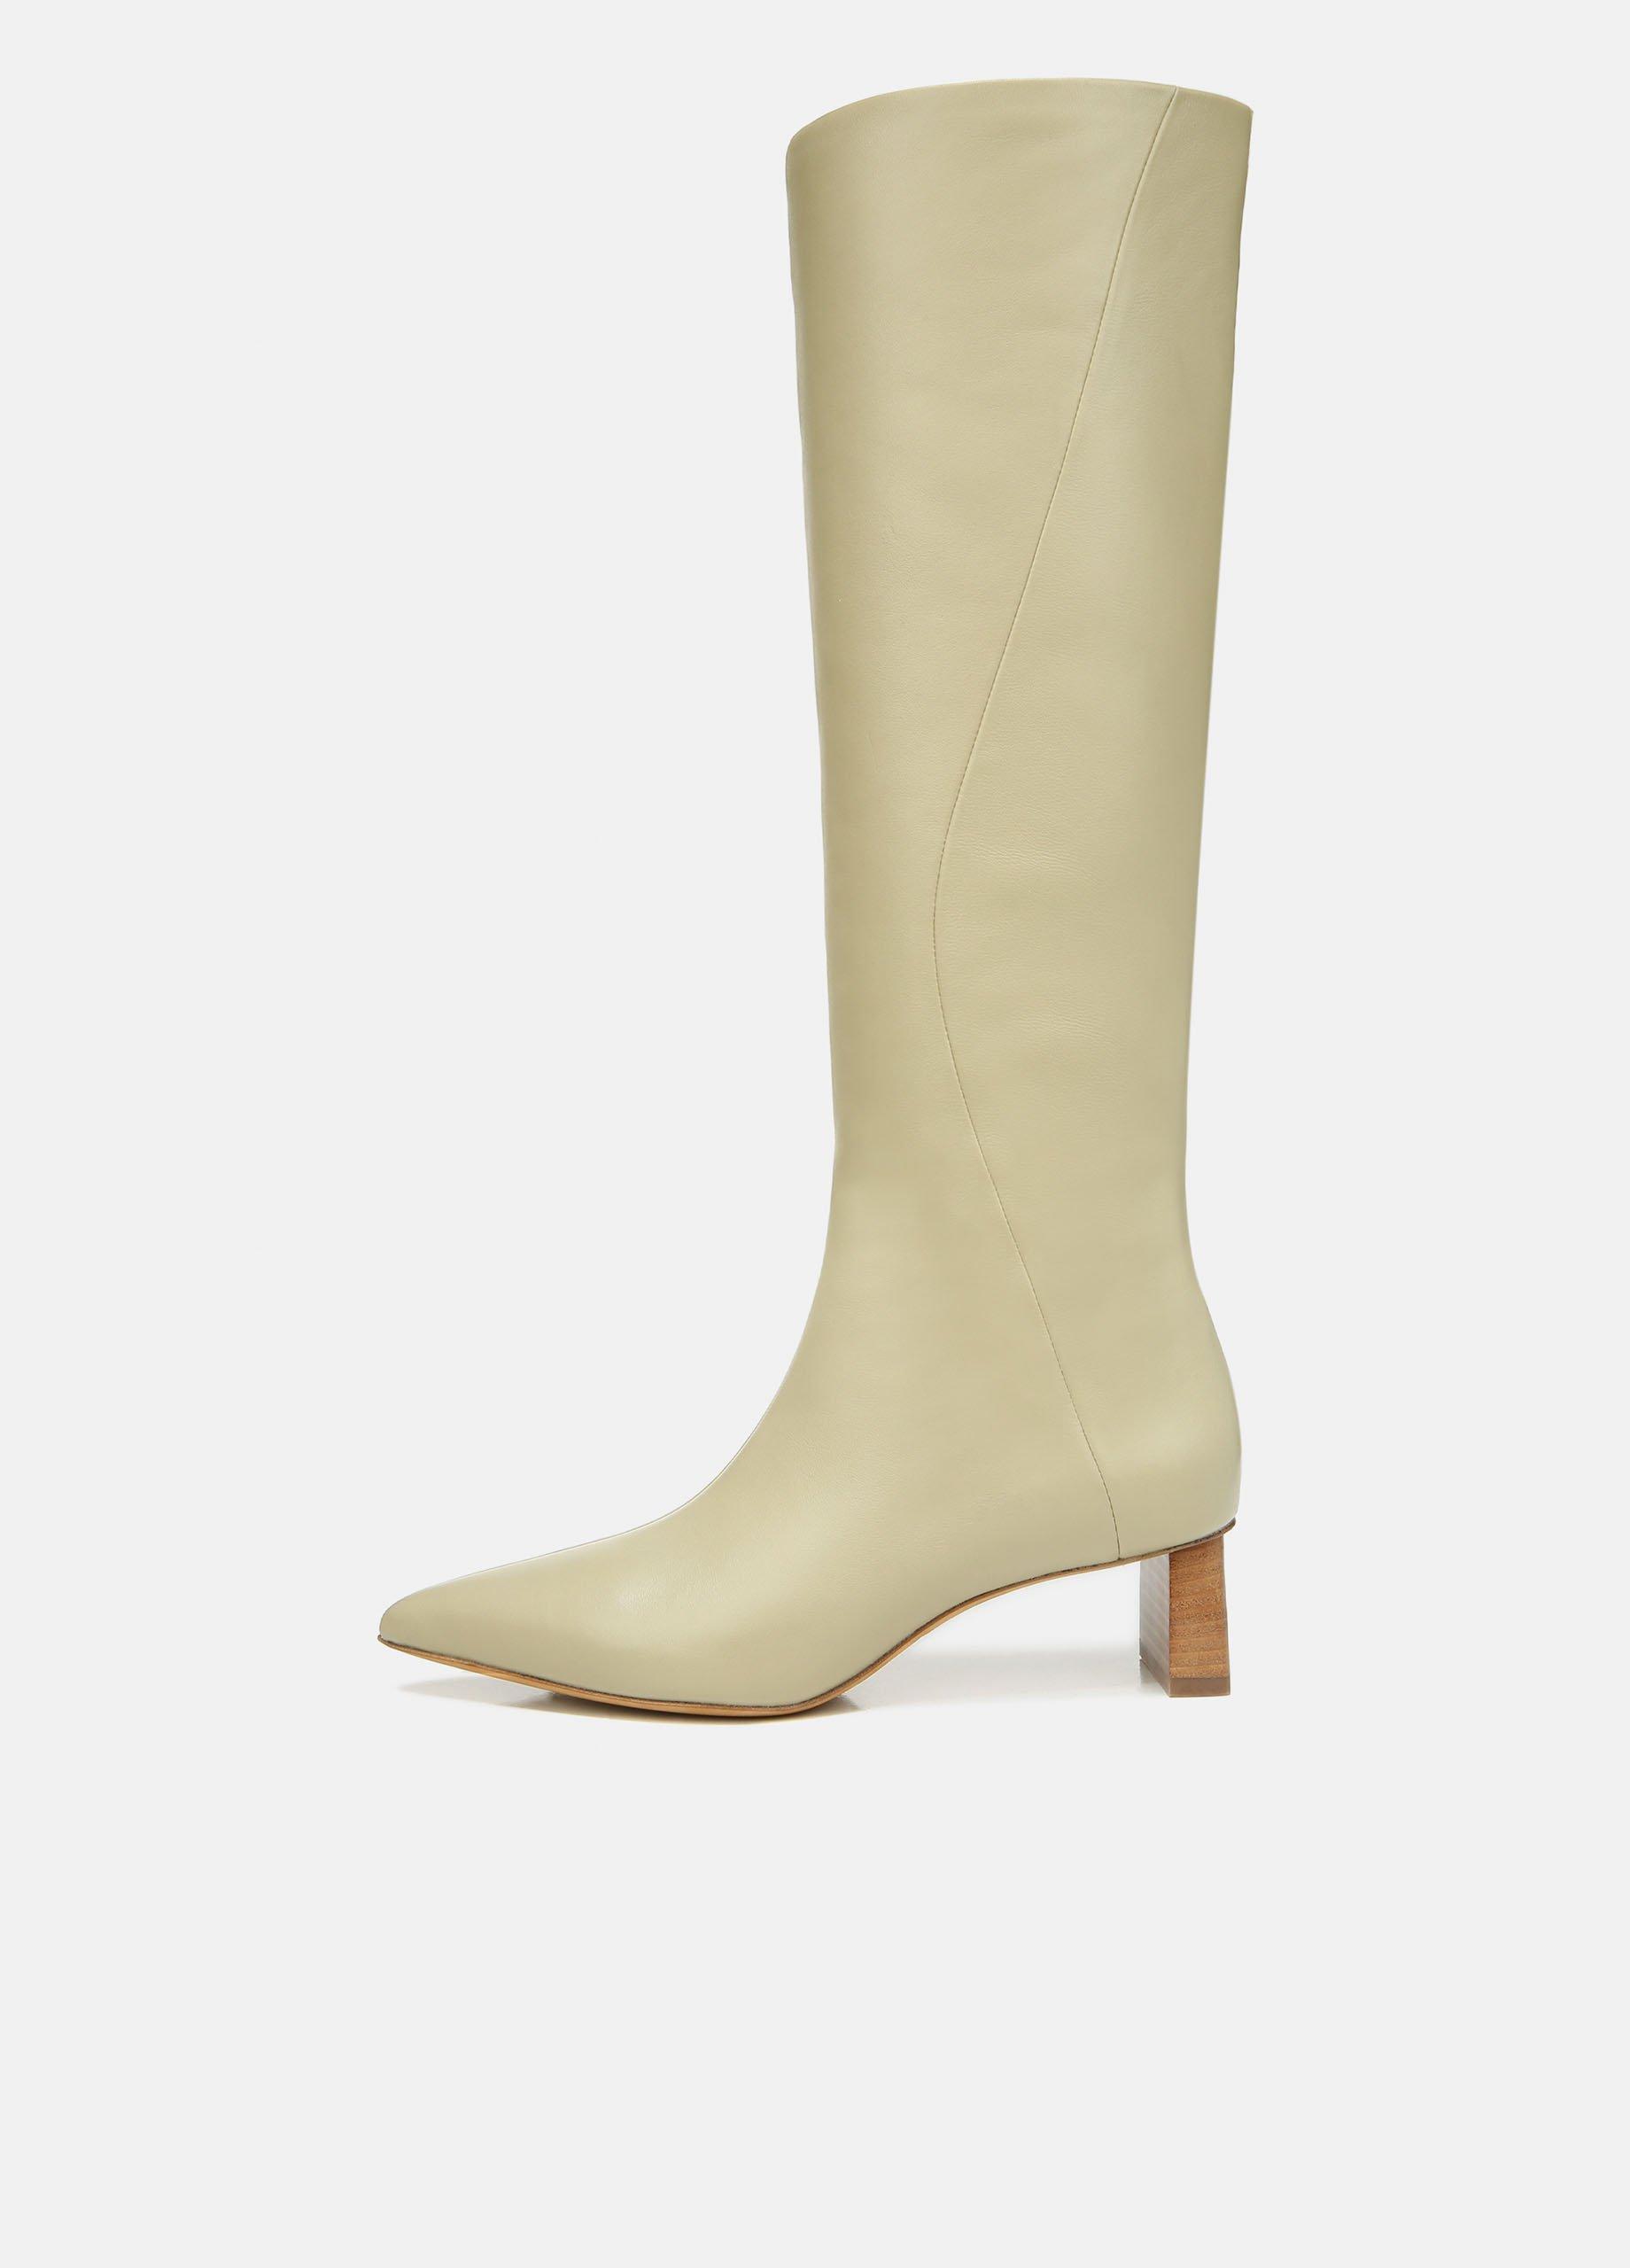 Femi Leather Boot in Vince Sold Out Products | Vince